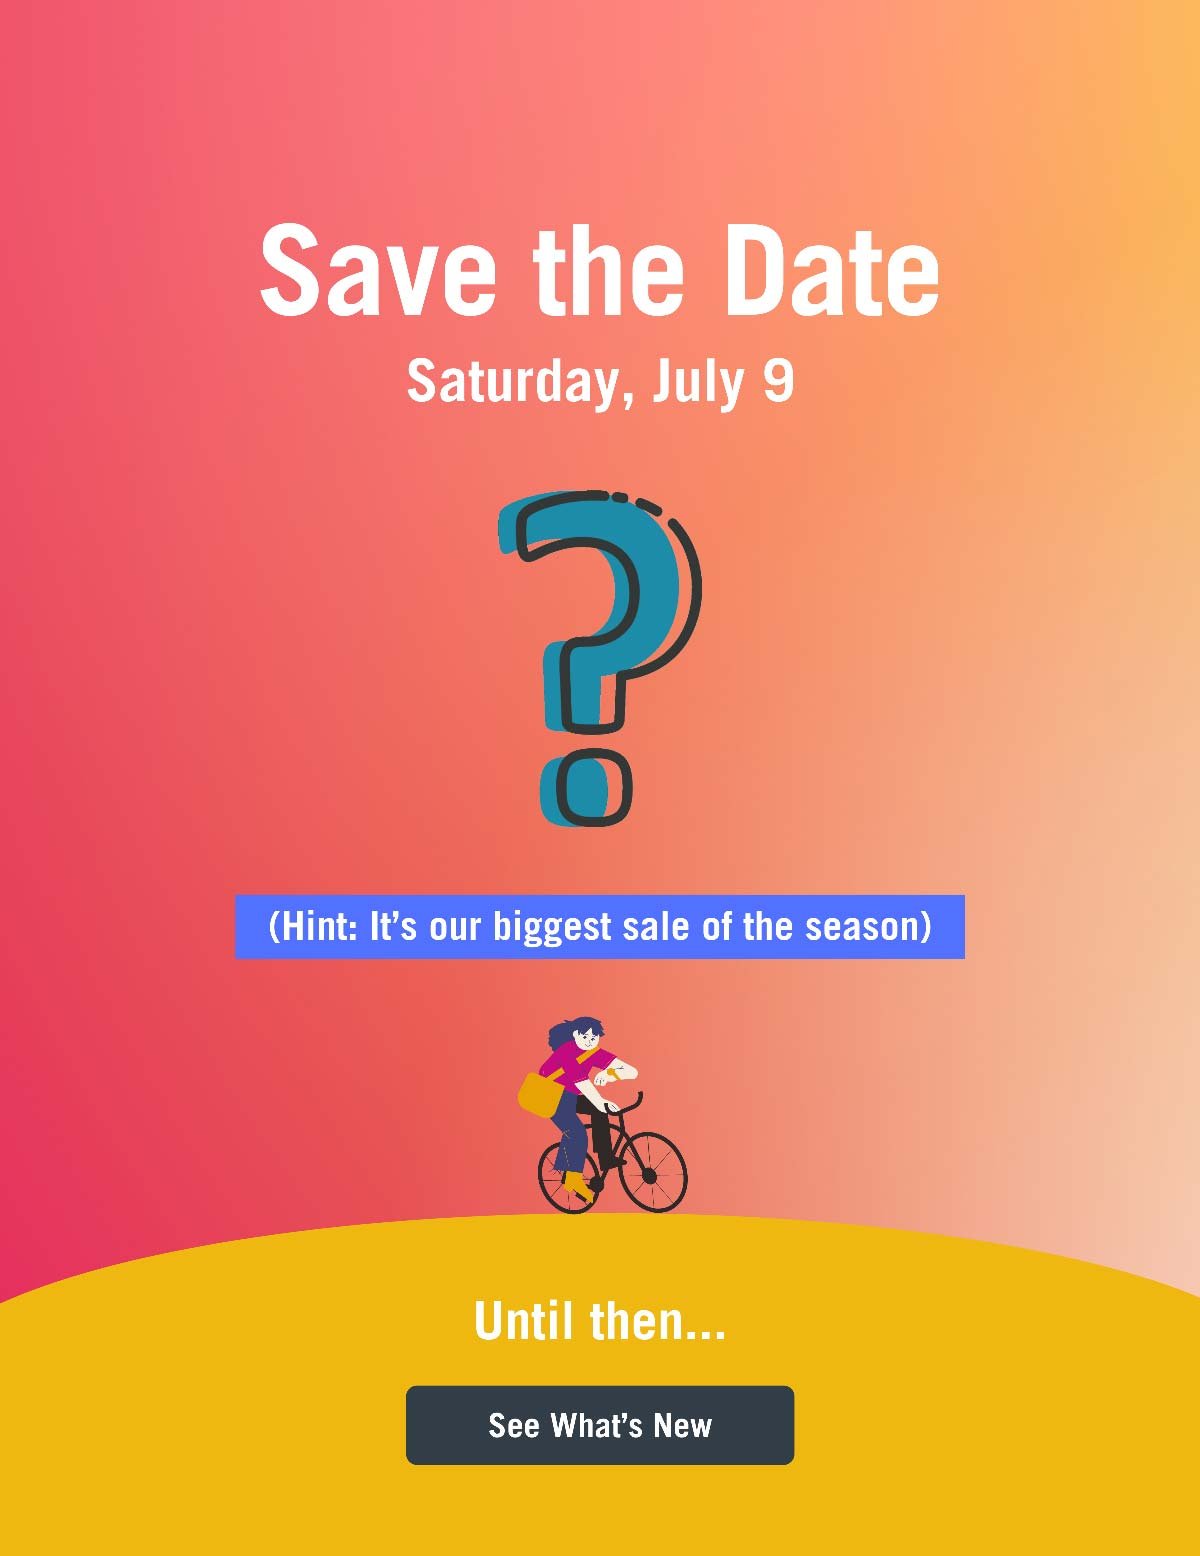 SAVE THE DATE. Saturday, July 9. (Hint: It's our biggest sale of the season). Until then, see what's new!